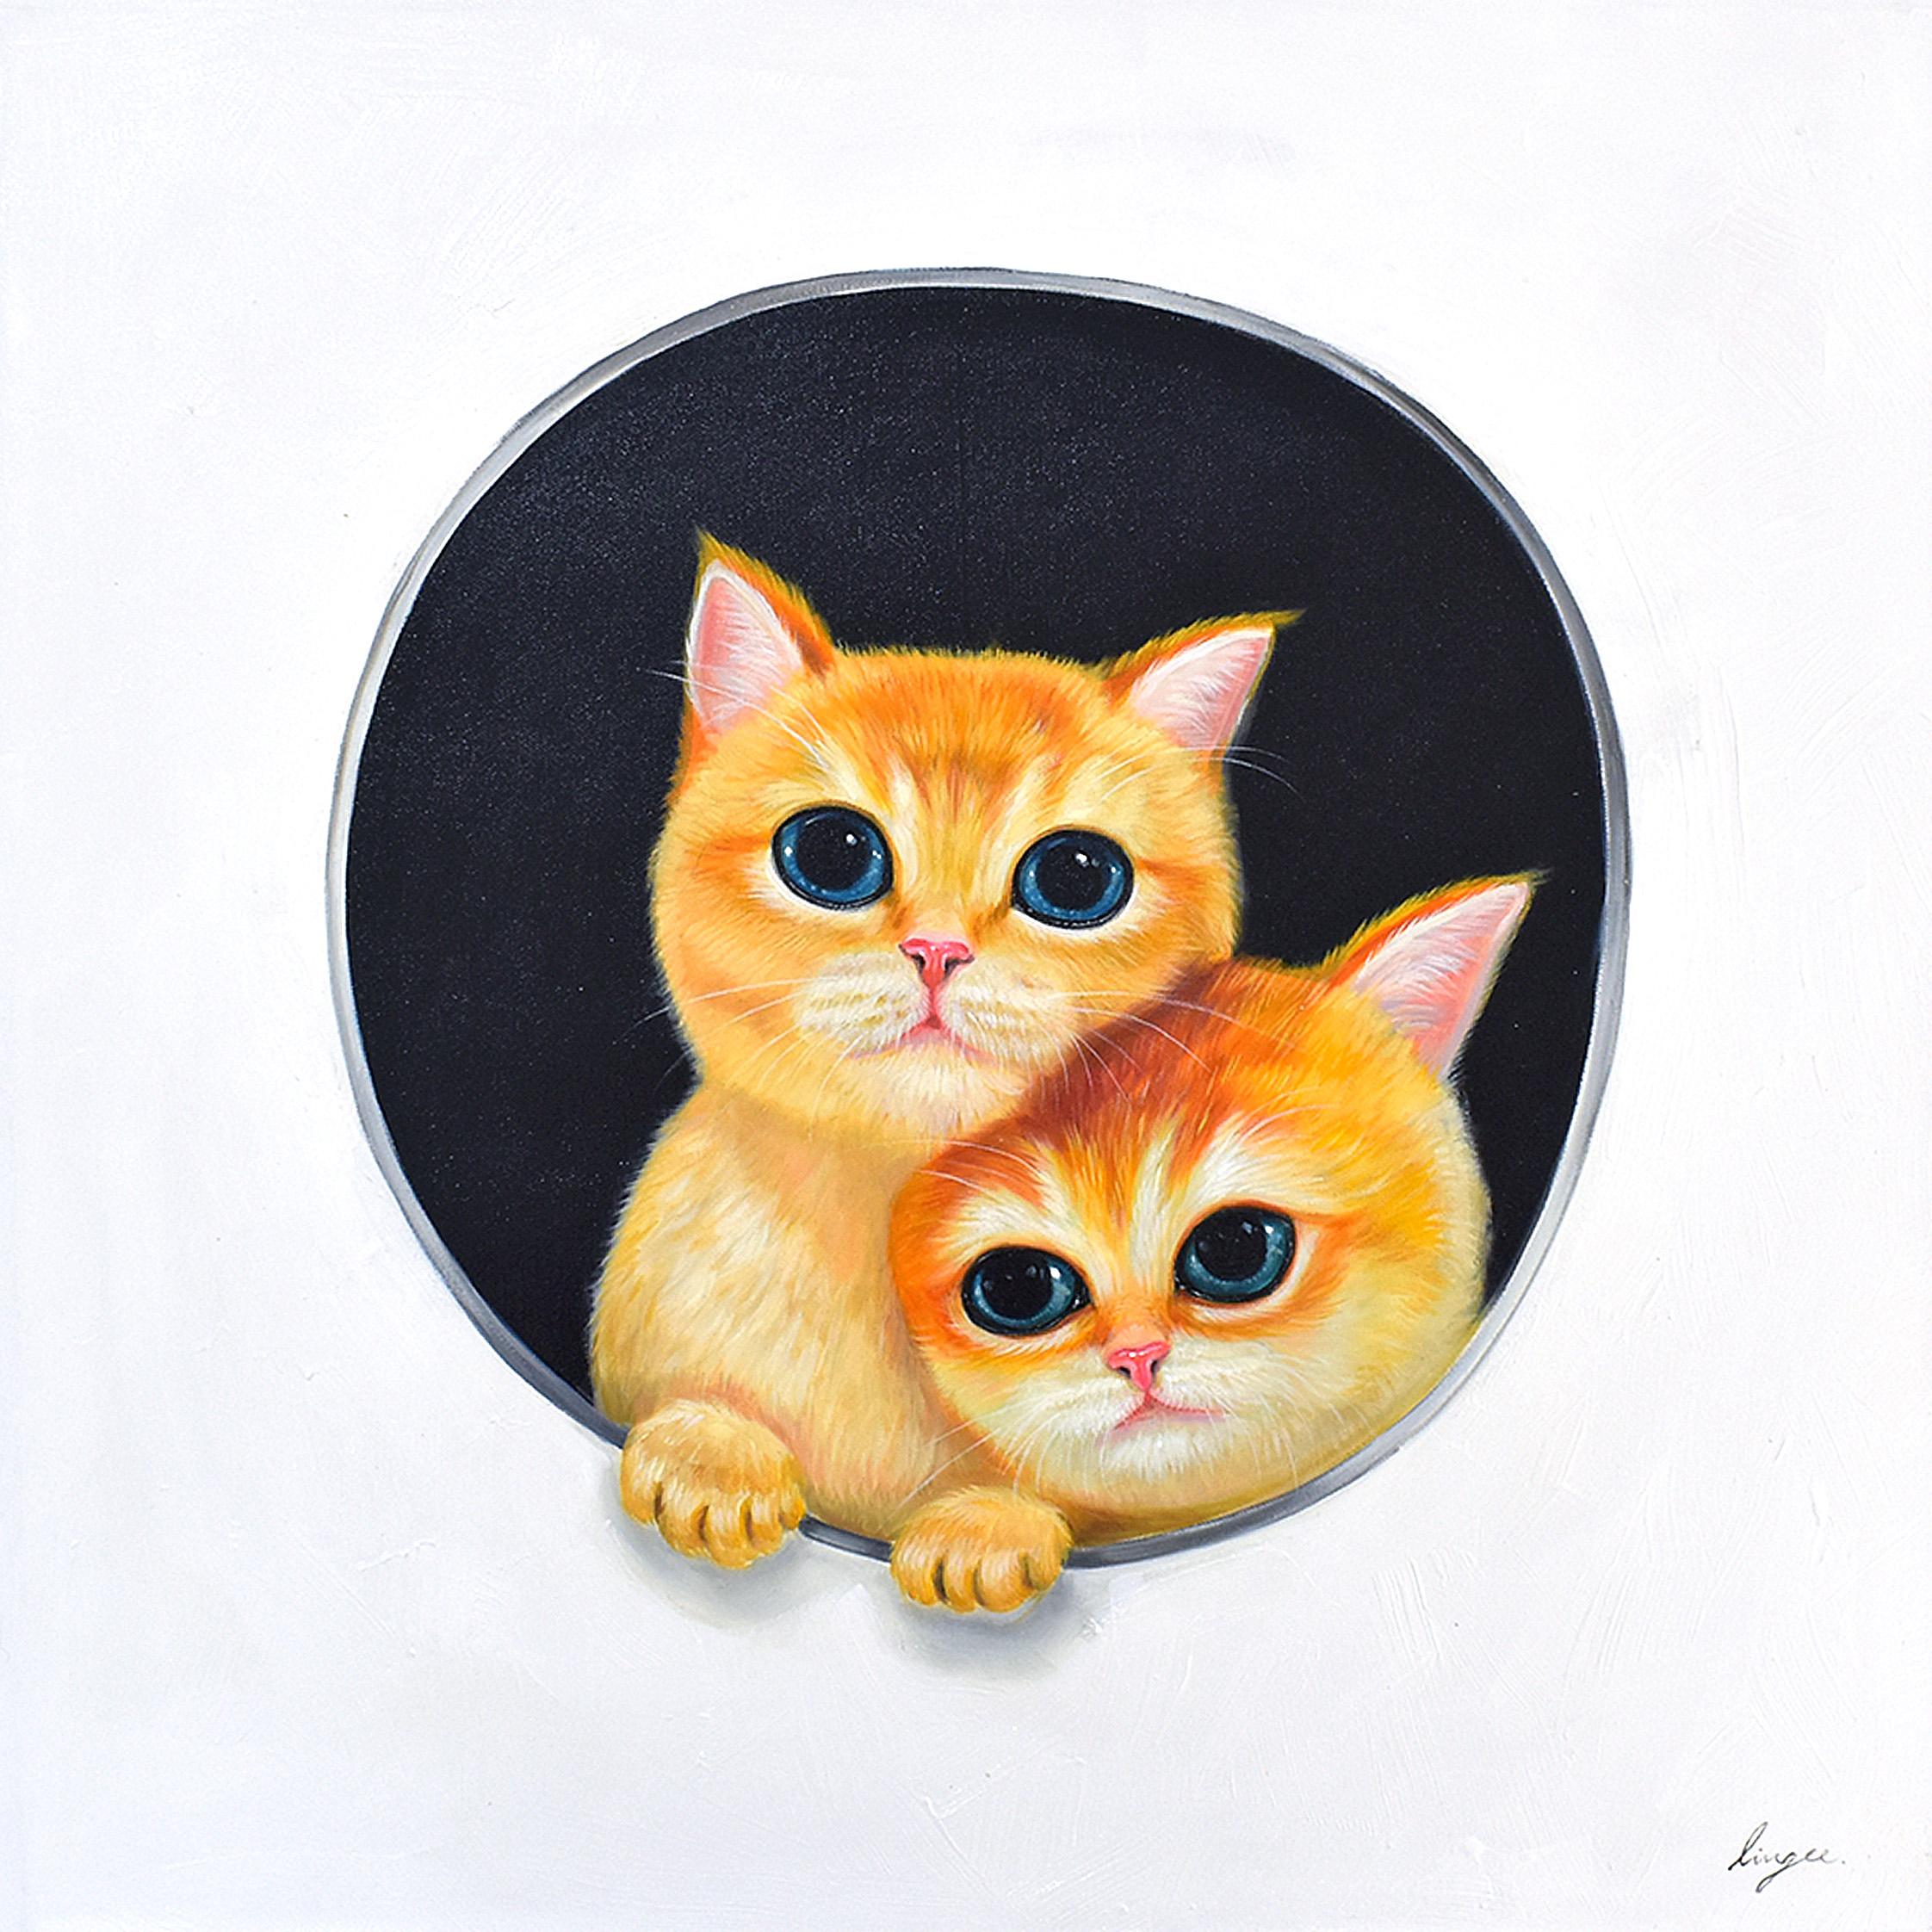 Lingee Bangkhuntod Animal Painting - Peeking Cats 3. Kittens looking Through a Hole. Adorable Orange Cat Oil Painting